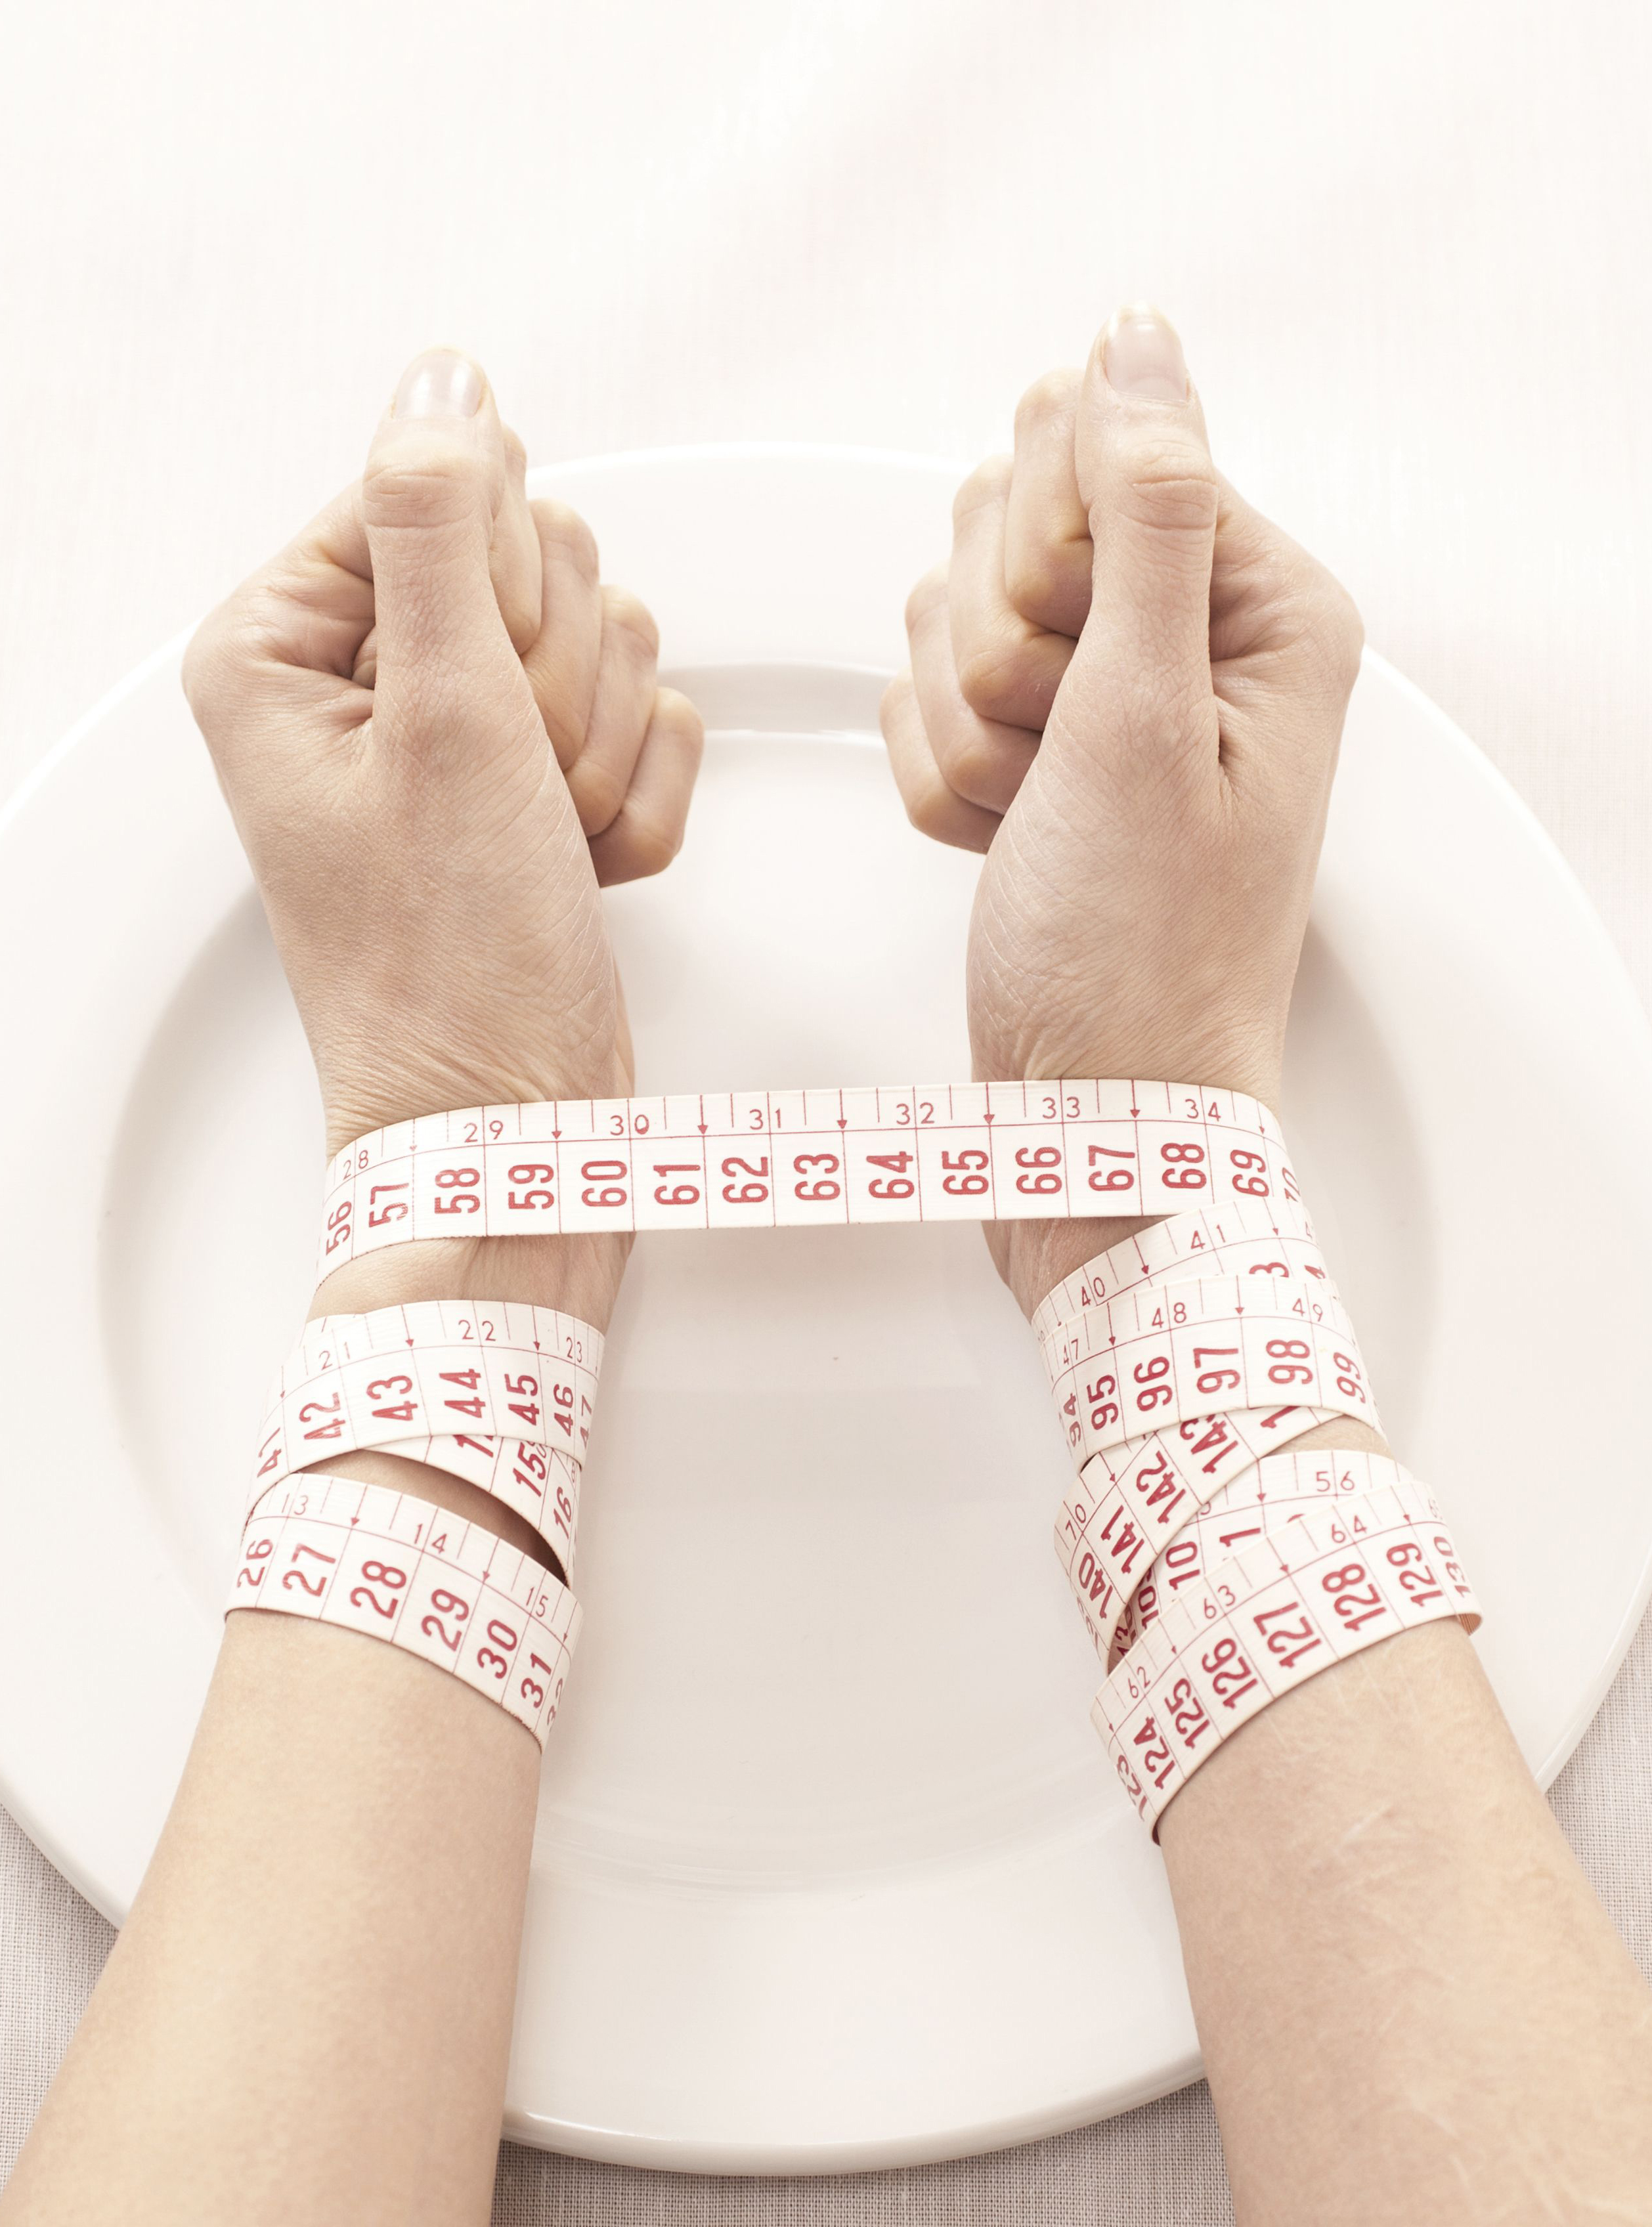 Eating Disorders Are On The Rise